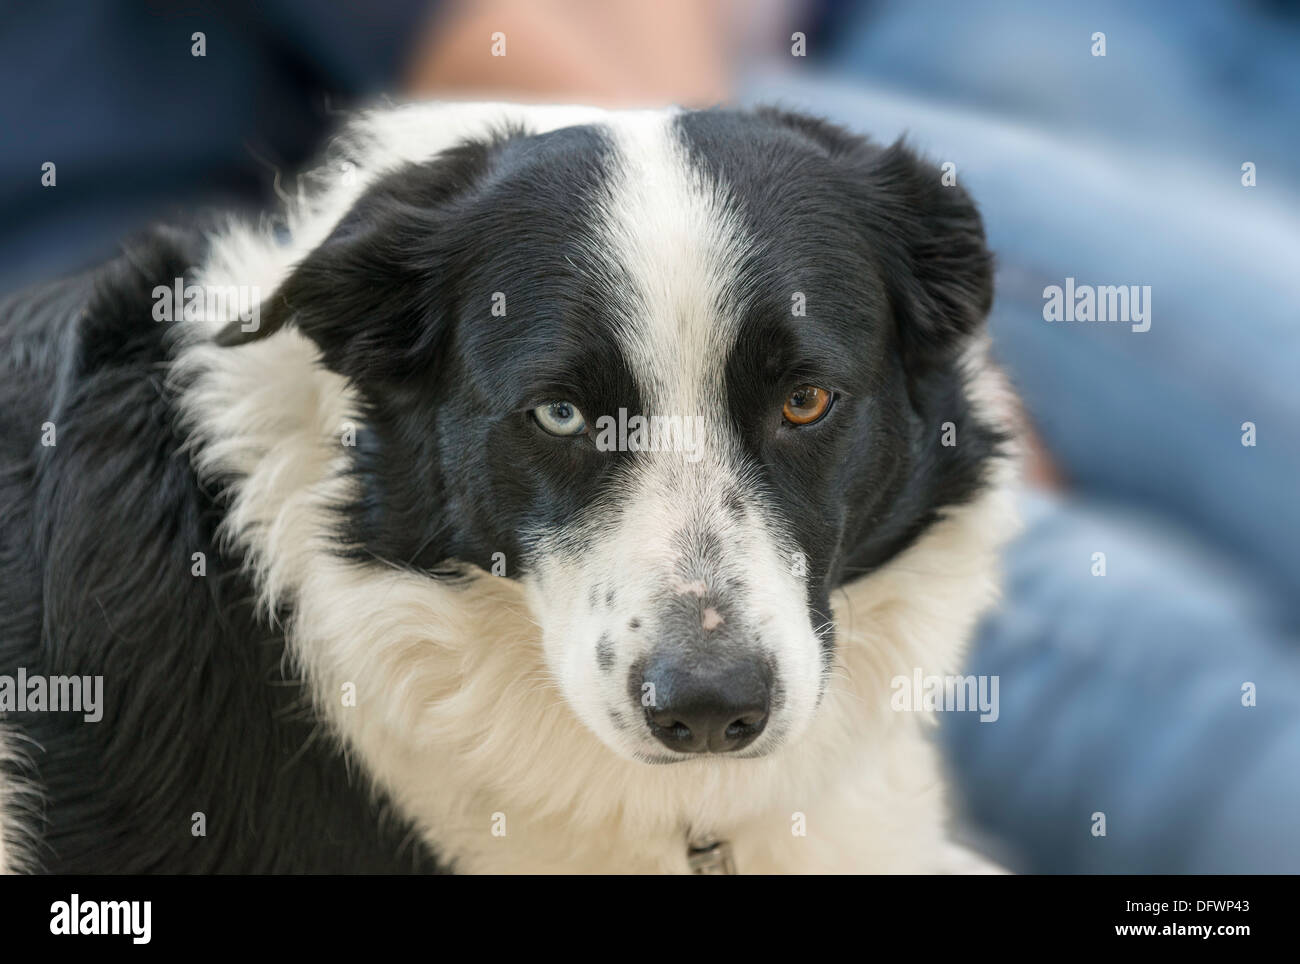 BORDER COLLIE SHEEP DOG WITH ONE BLUE EYE AND ONE BROWN EYE Stock Photo